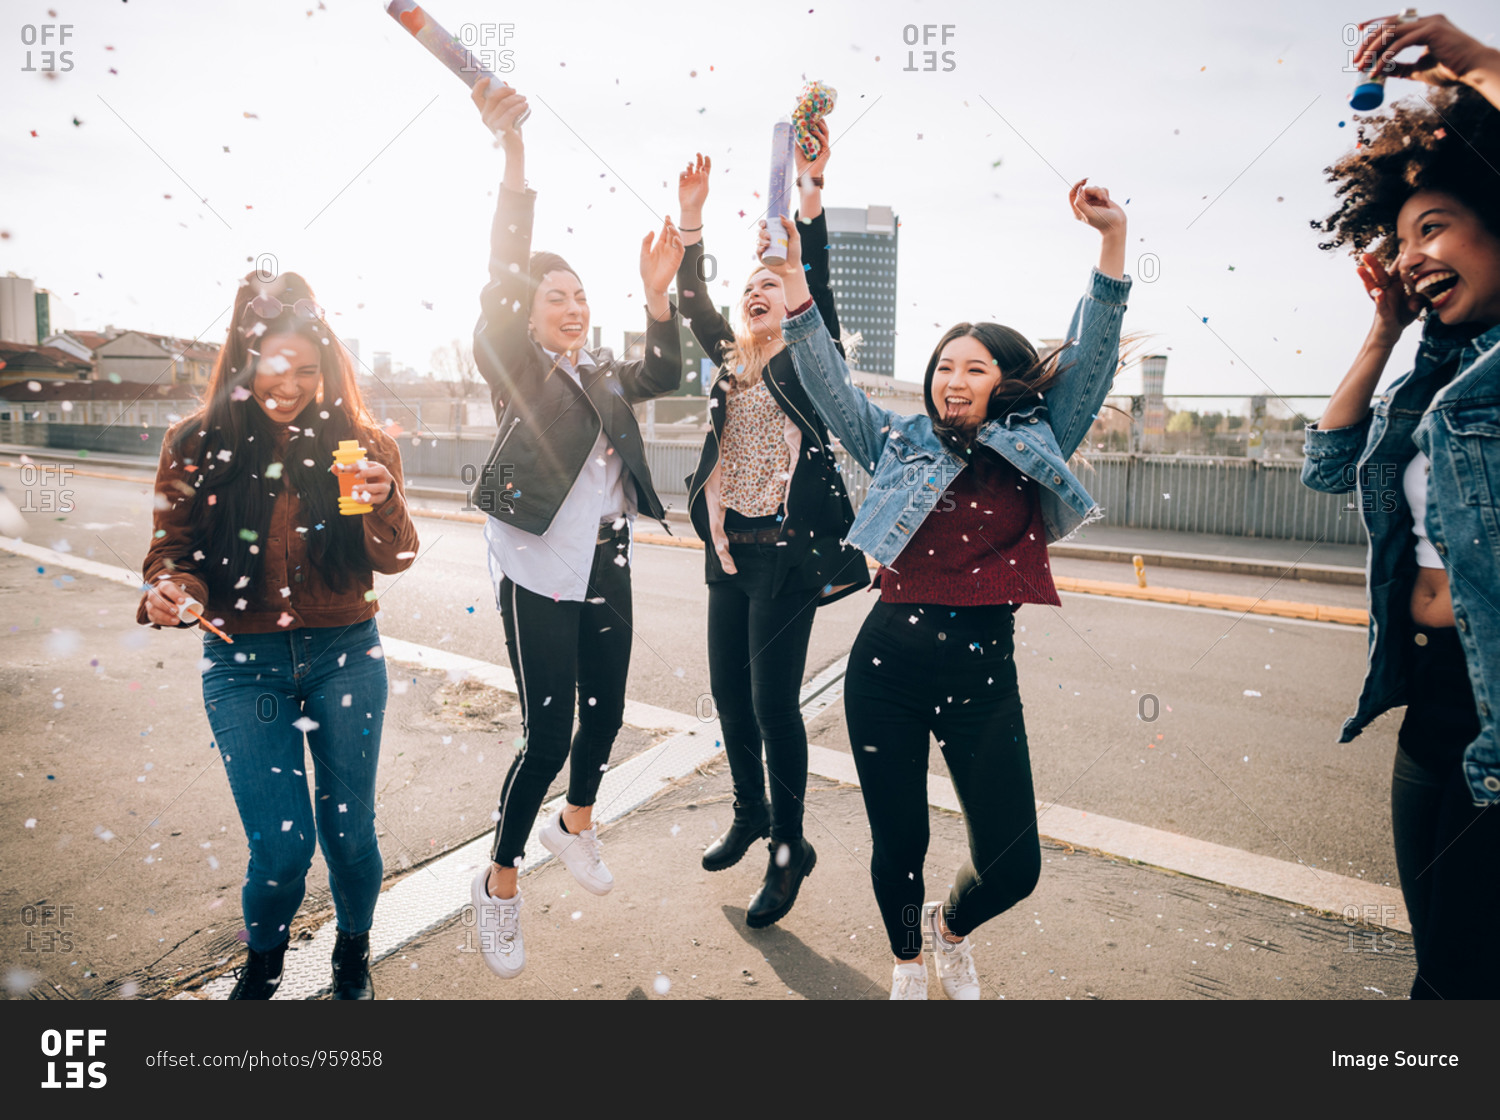 Friends celebrating with confetti and soap bubbles in street, Milan, Italy